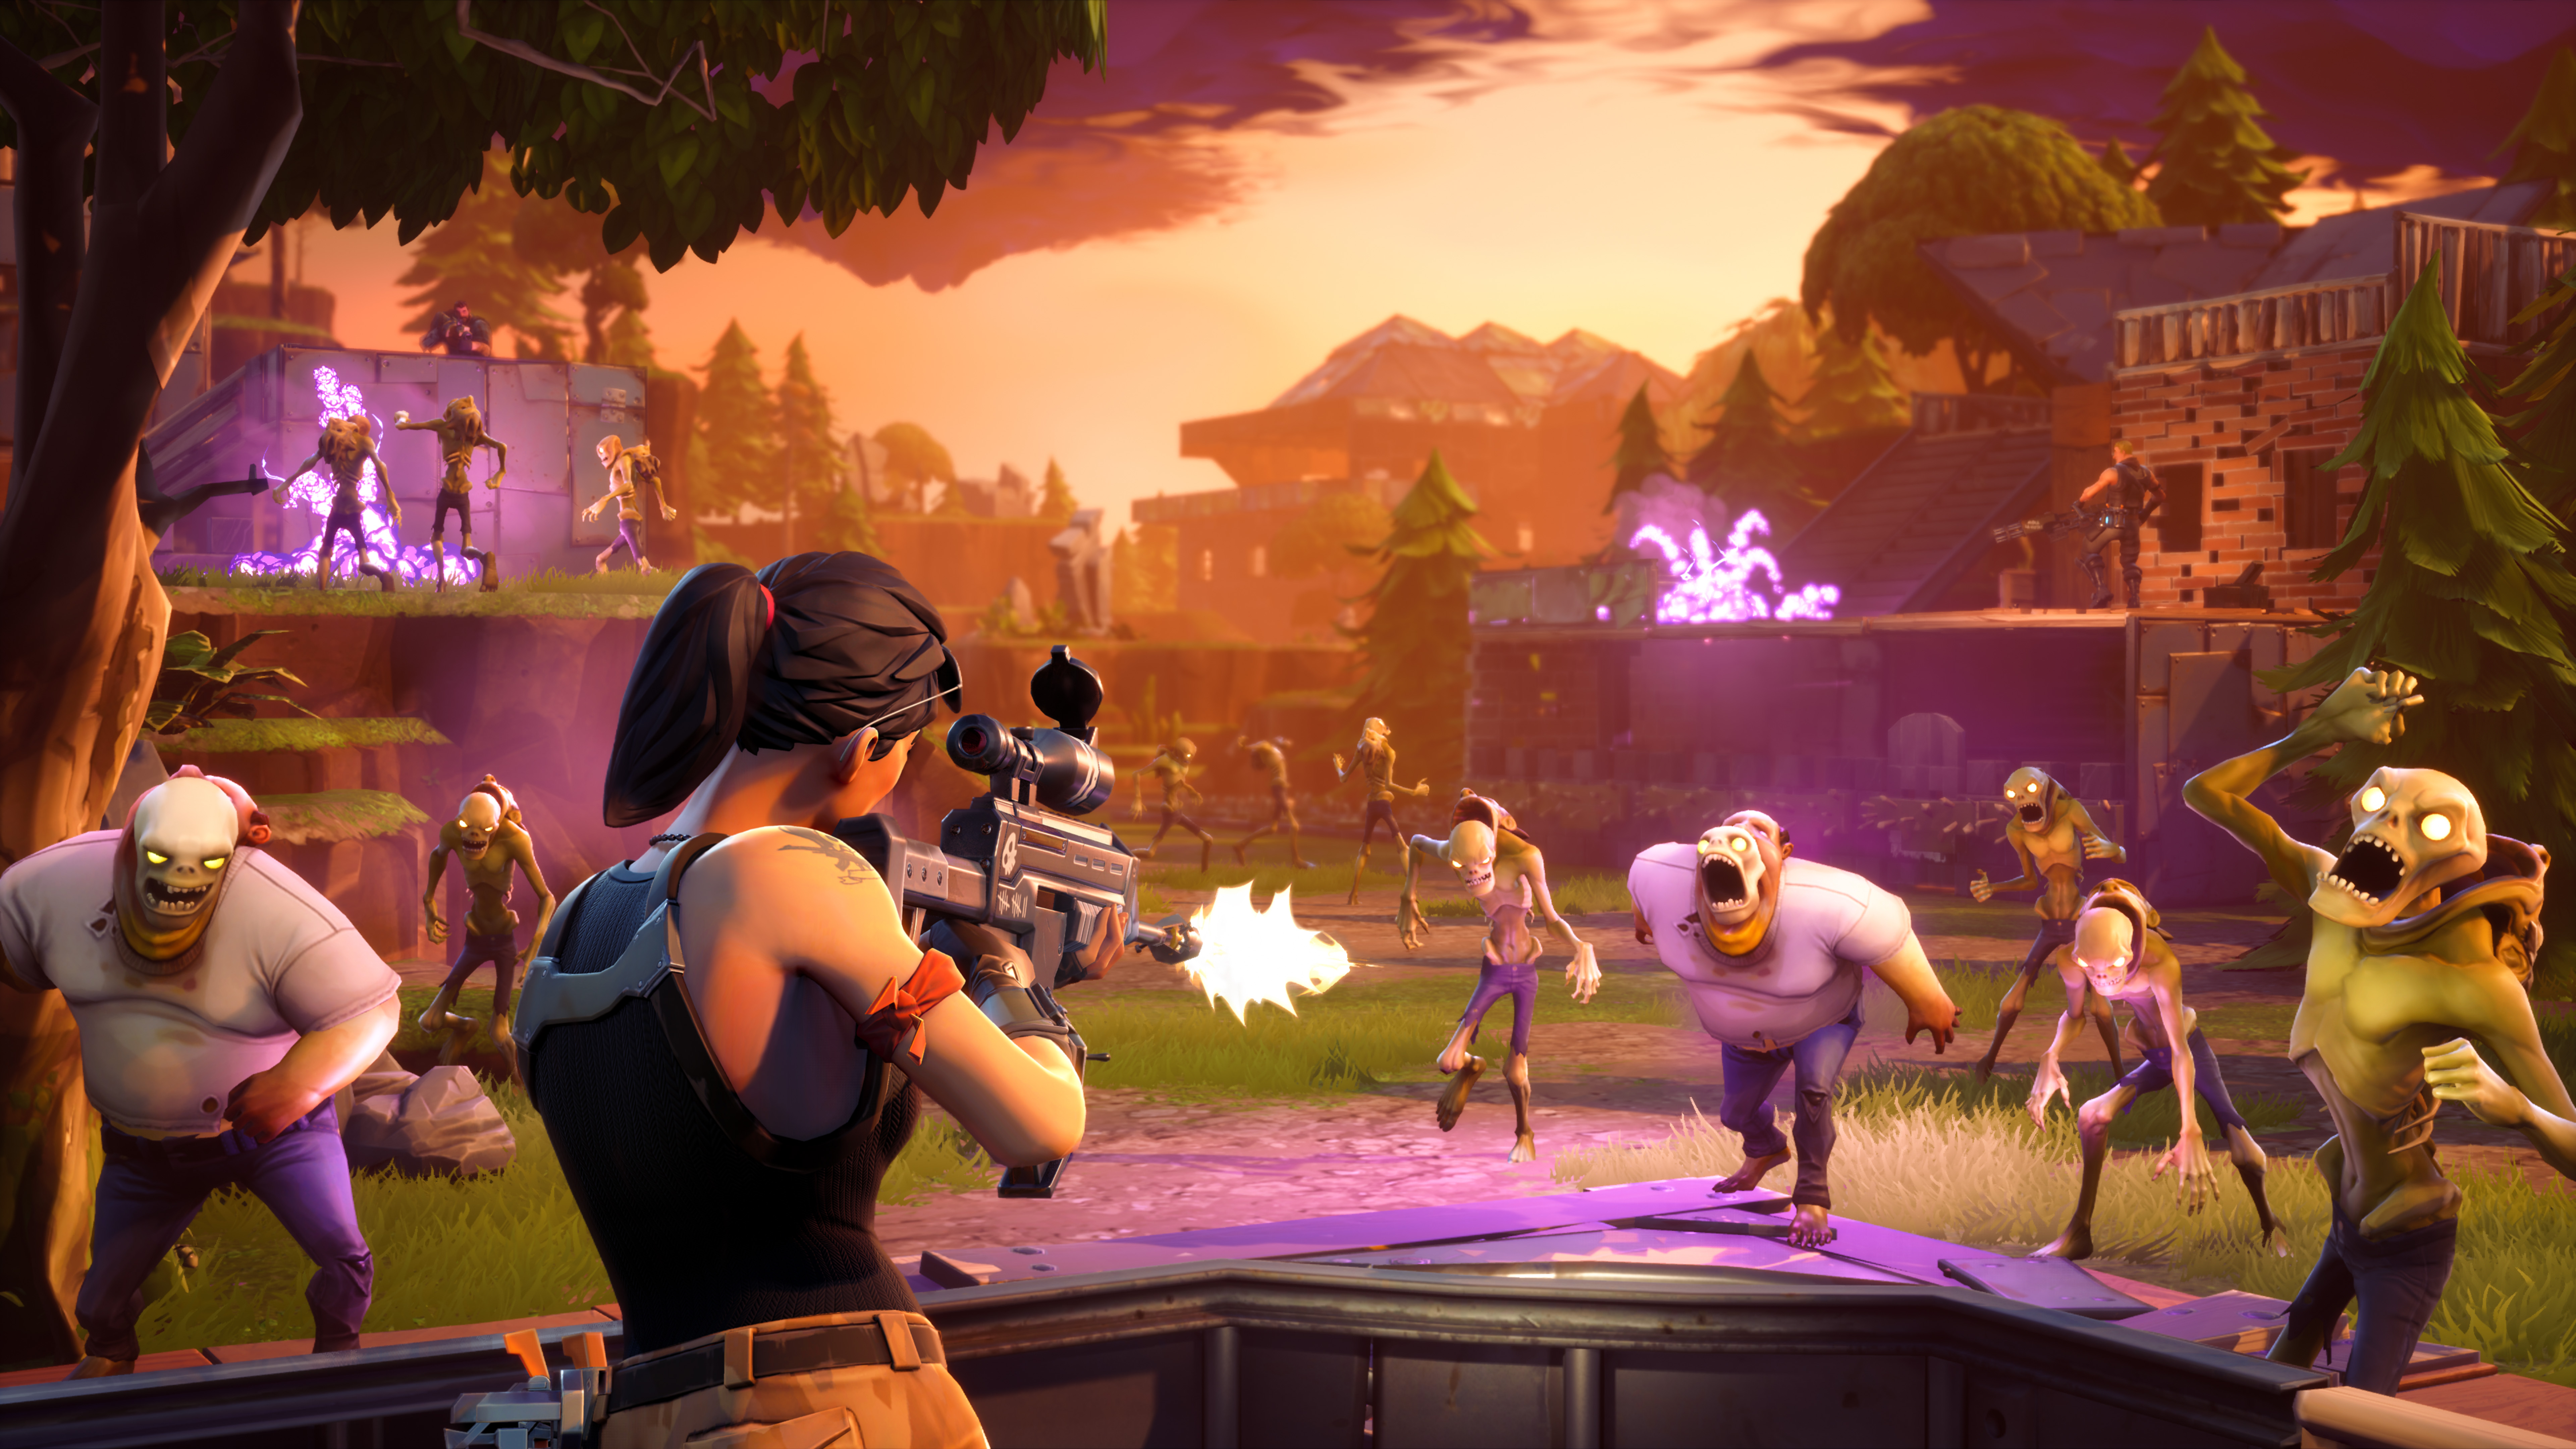 fortnite looks and feels like this nicely staged promo pic of in game action however so many free to play annoyances drag this build a base - bad building fortnite